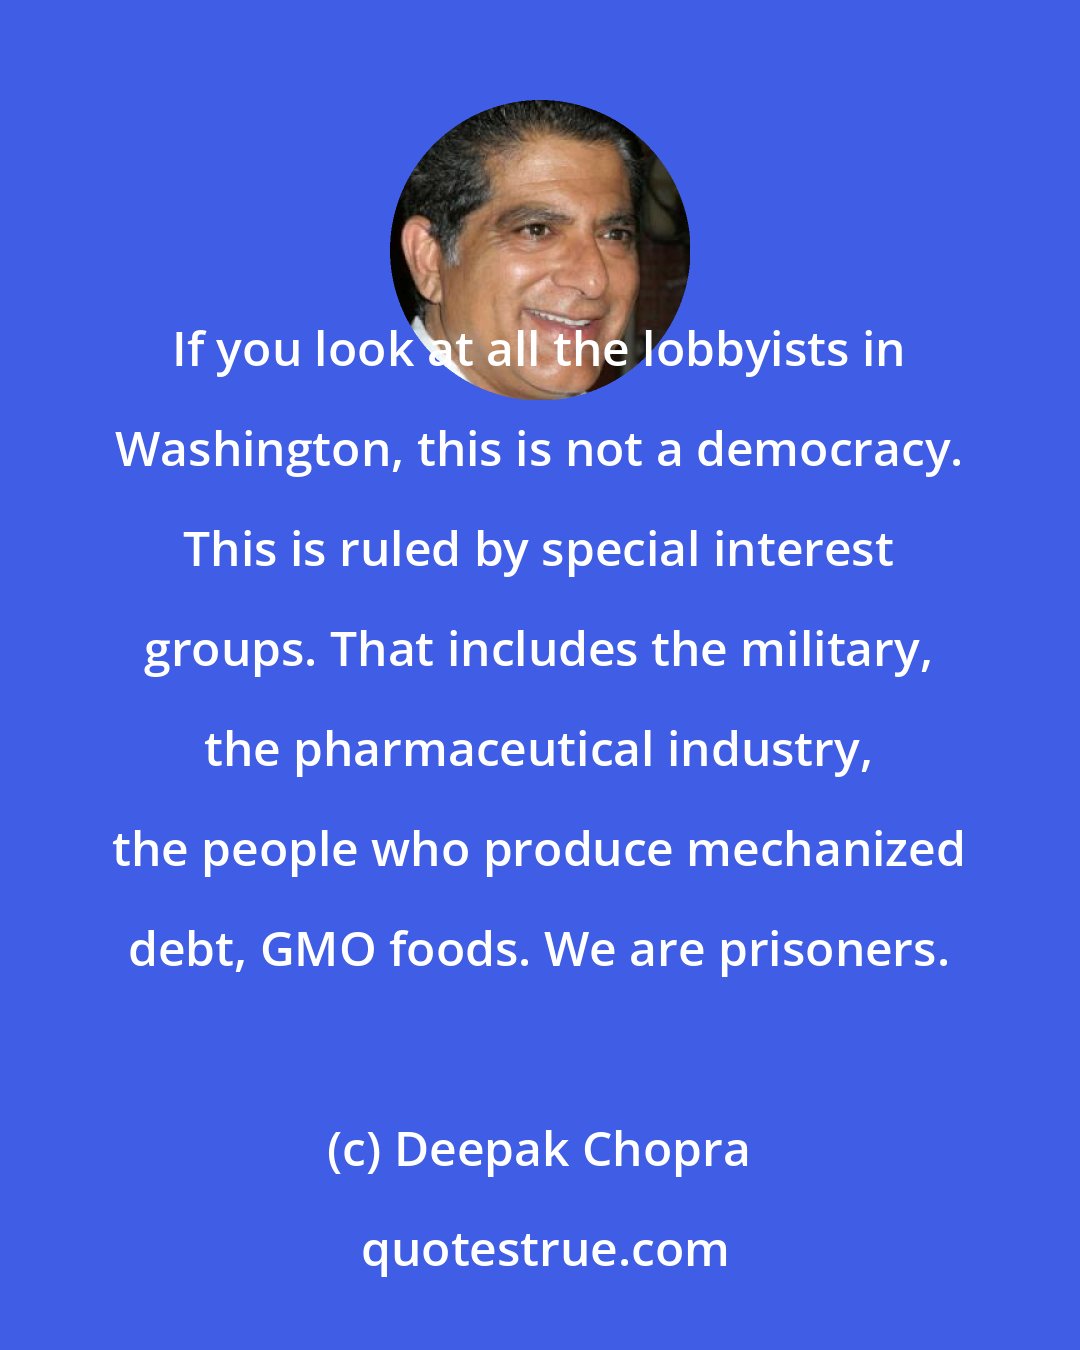 Deepak Chopra: If you look at all the lobbyists in Washington, this is not a democracy. This is ruled by special interest groups. That includes the military, the pharmaceutical industry, the people who produce mechanized debt, GMO foods. We are prisoners.